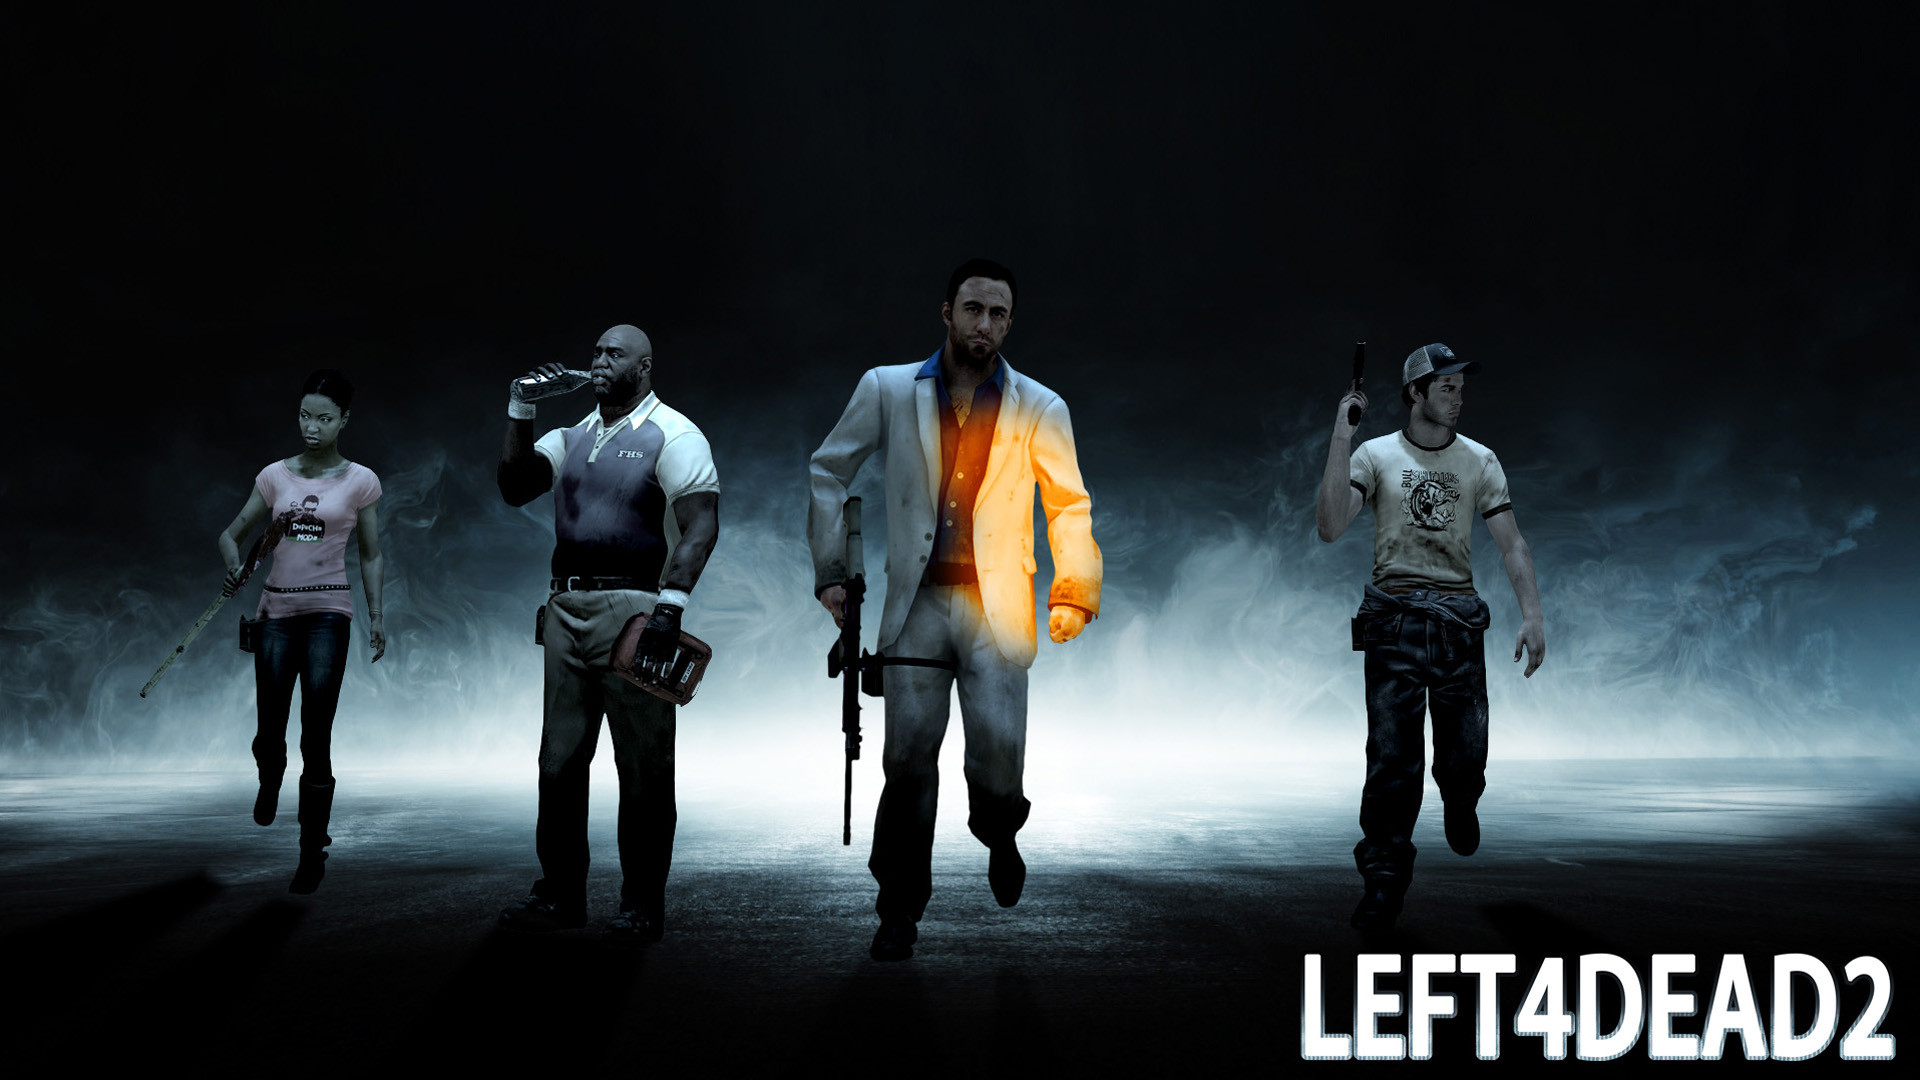 1920x1080 ... 52 Left 4 Dead 2 HD Wallpapers | Backgrounds - Wallpaper Abyss ...